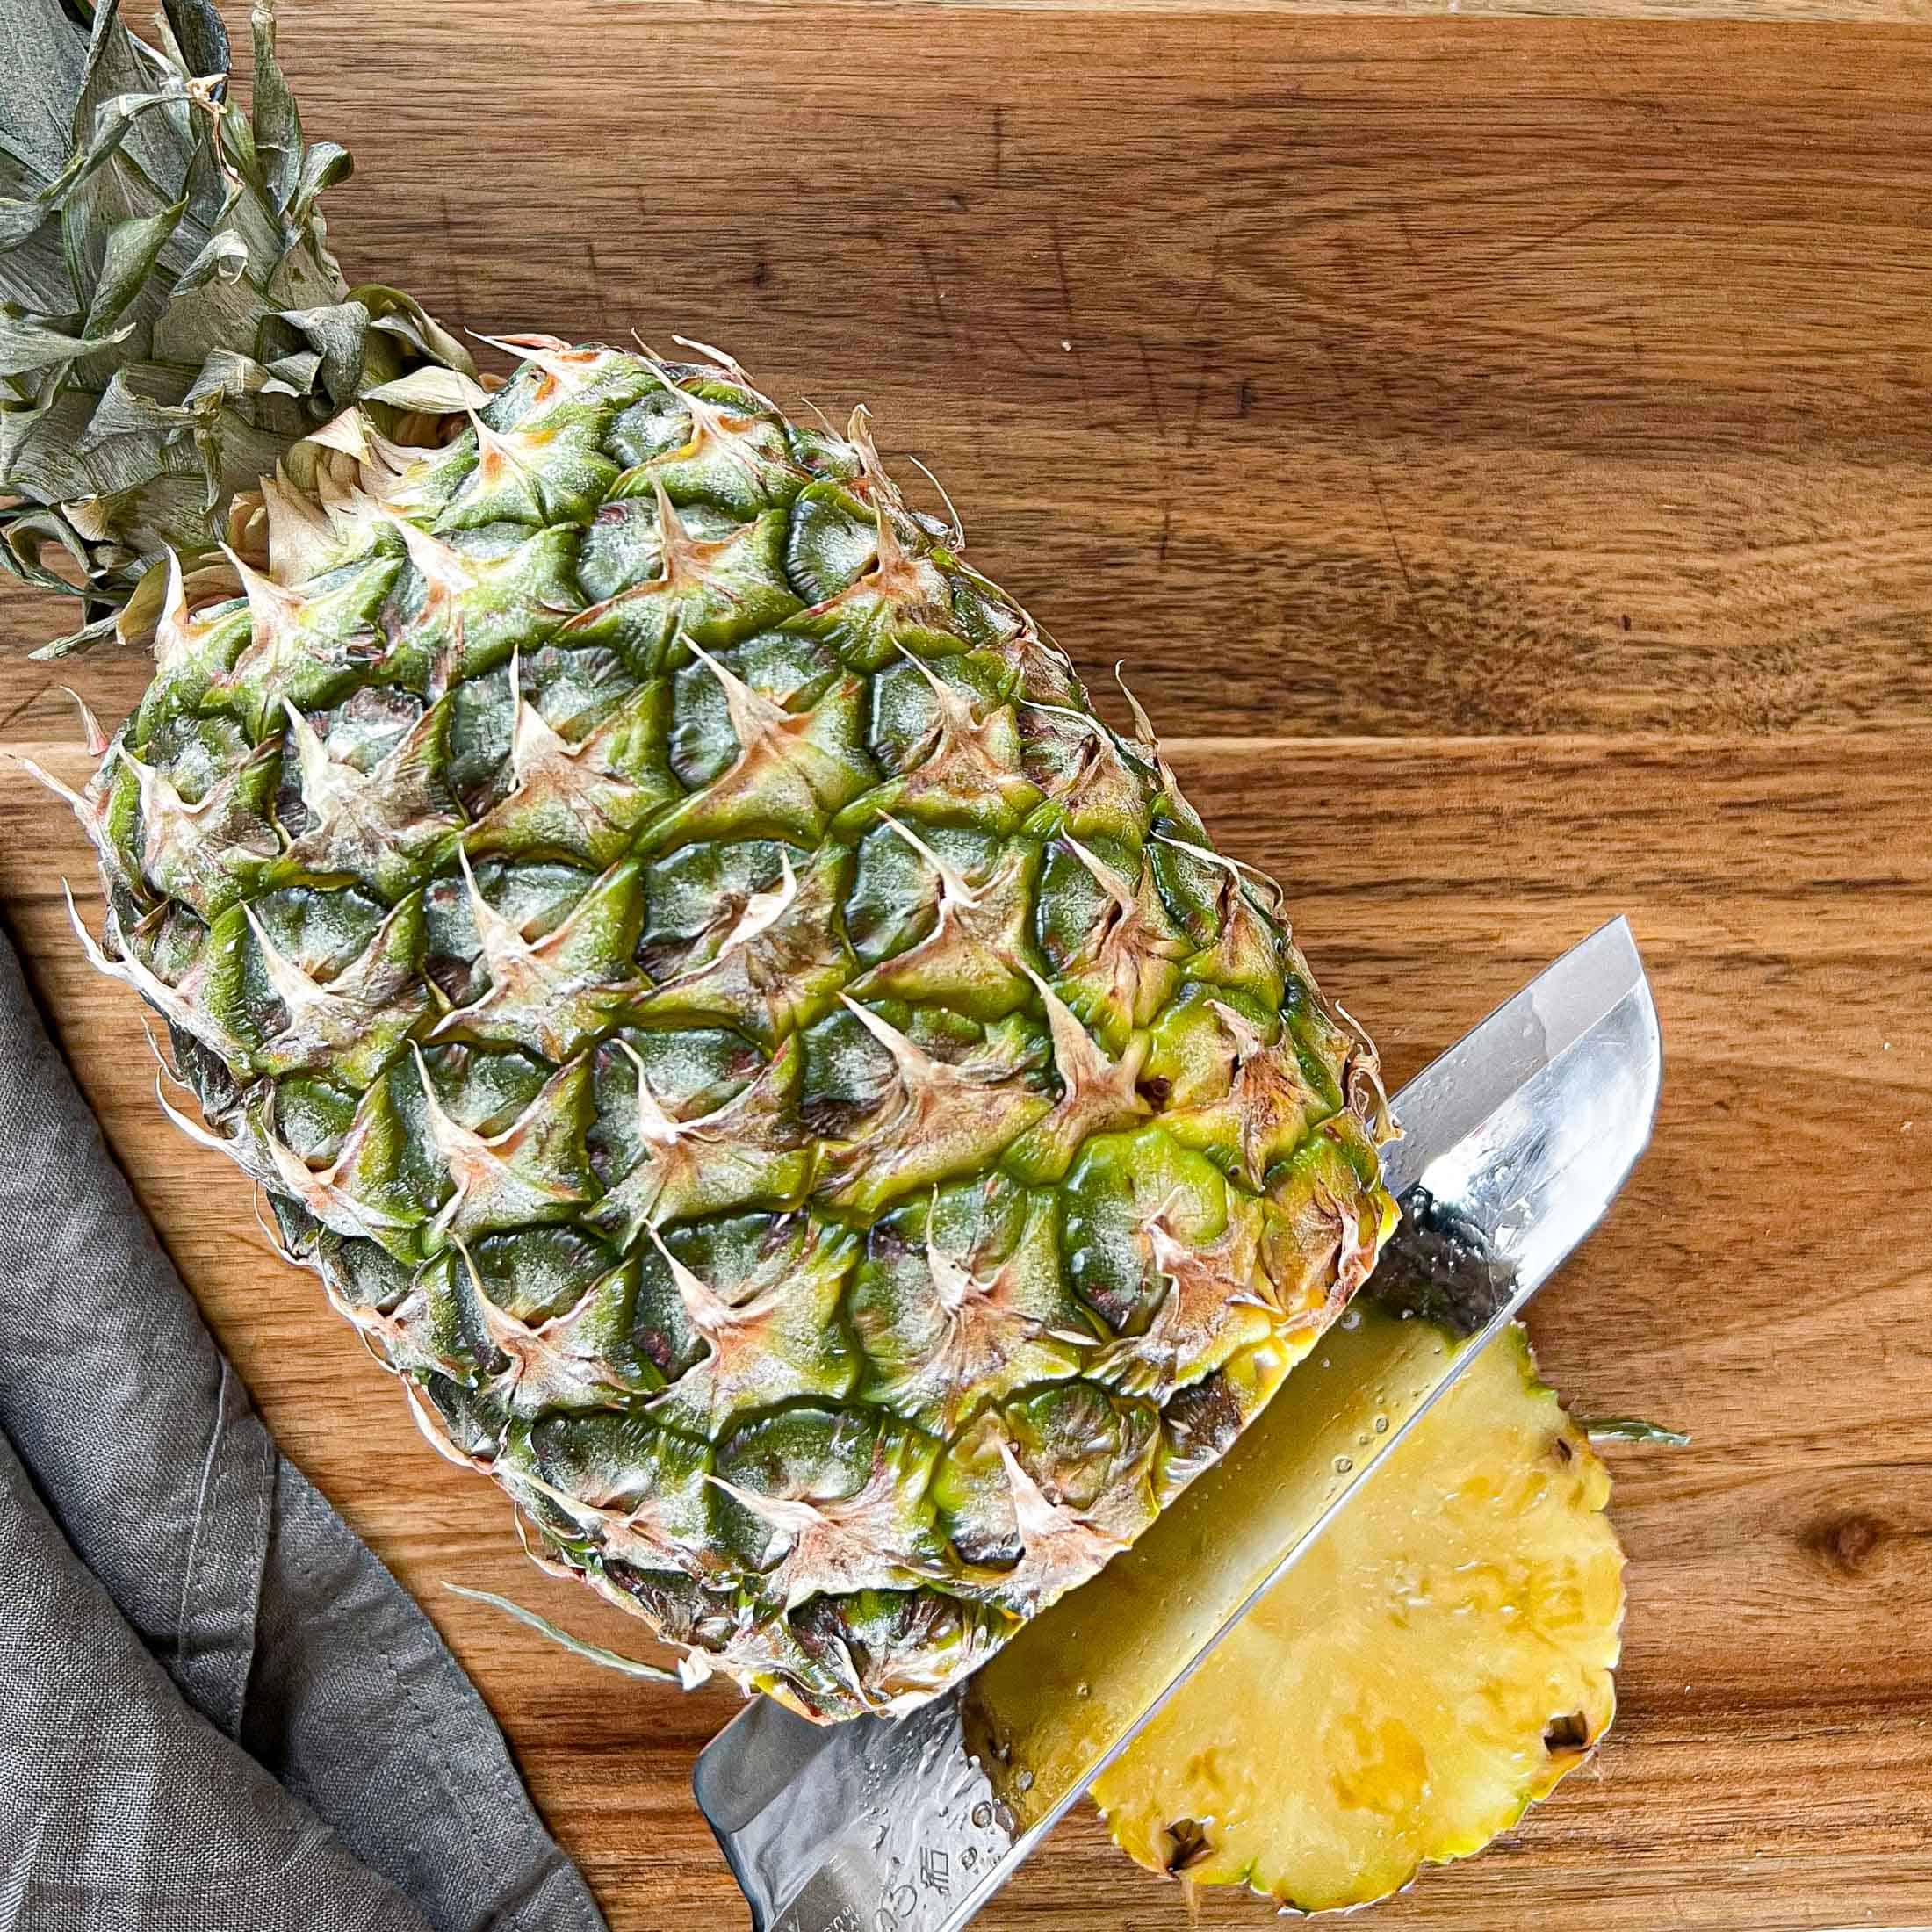 Slicing off the bottom of a pineapple.